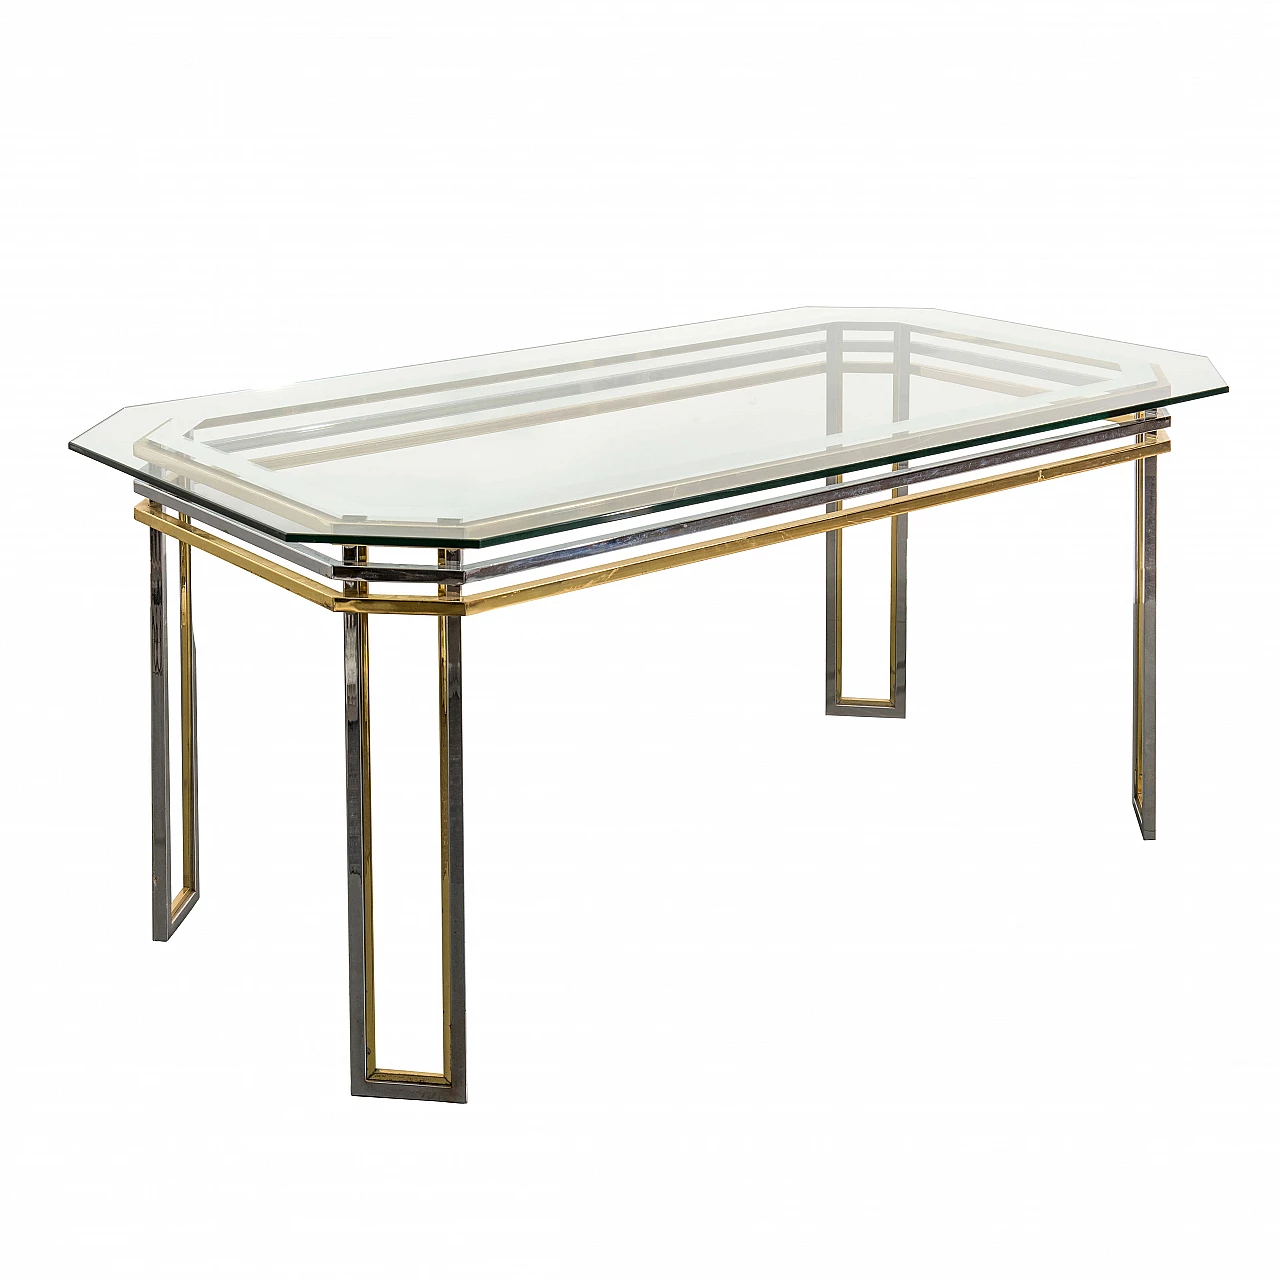 Table with 6 chairs in brass and glass, Romeo Rega style 1141436